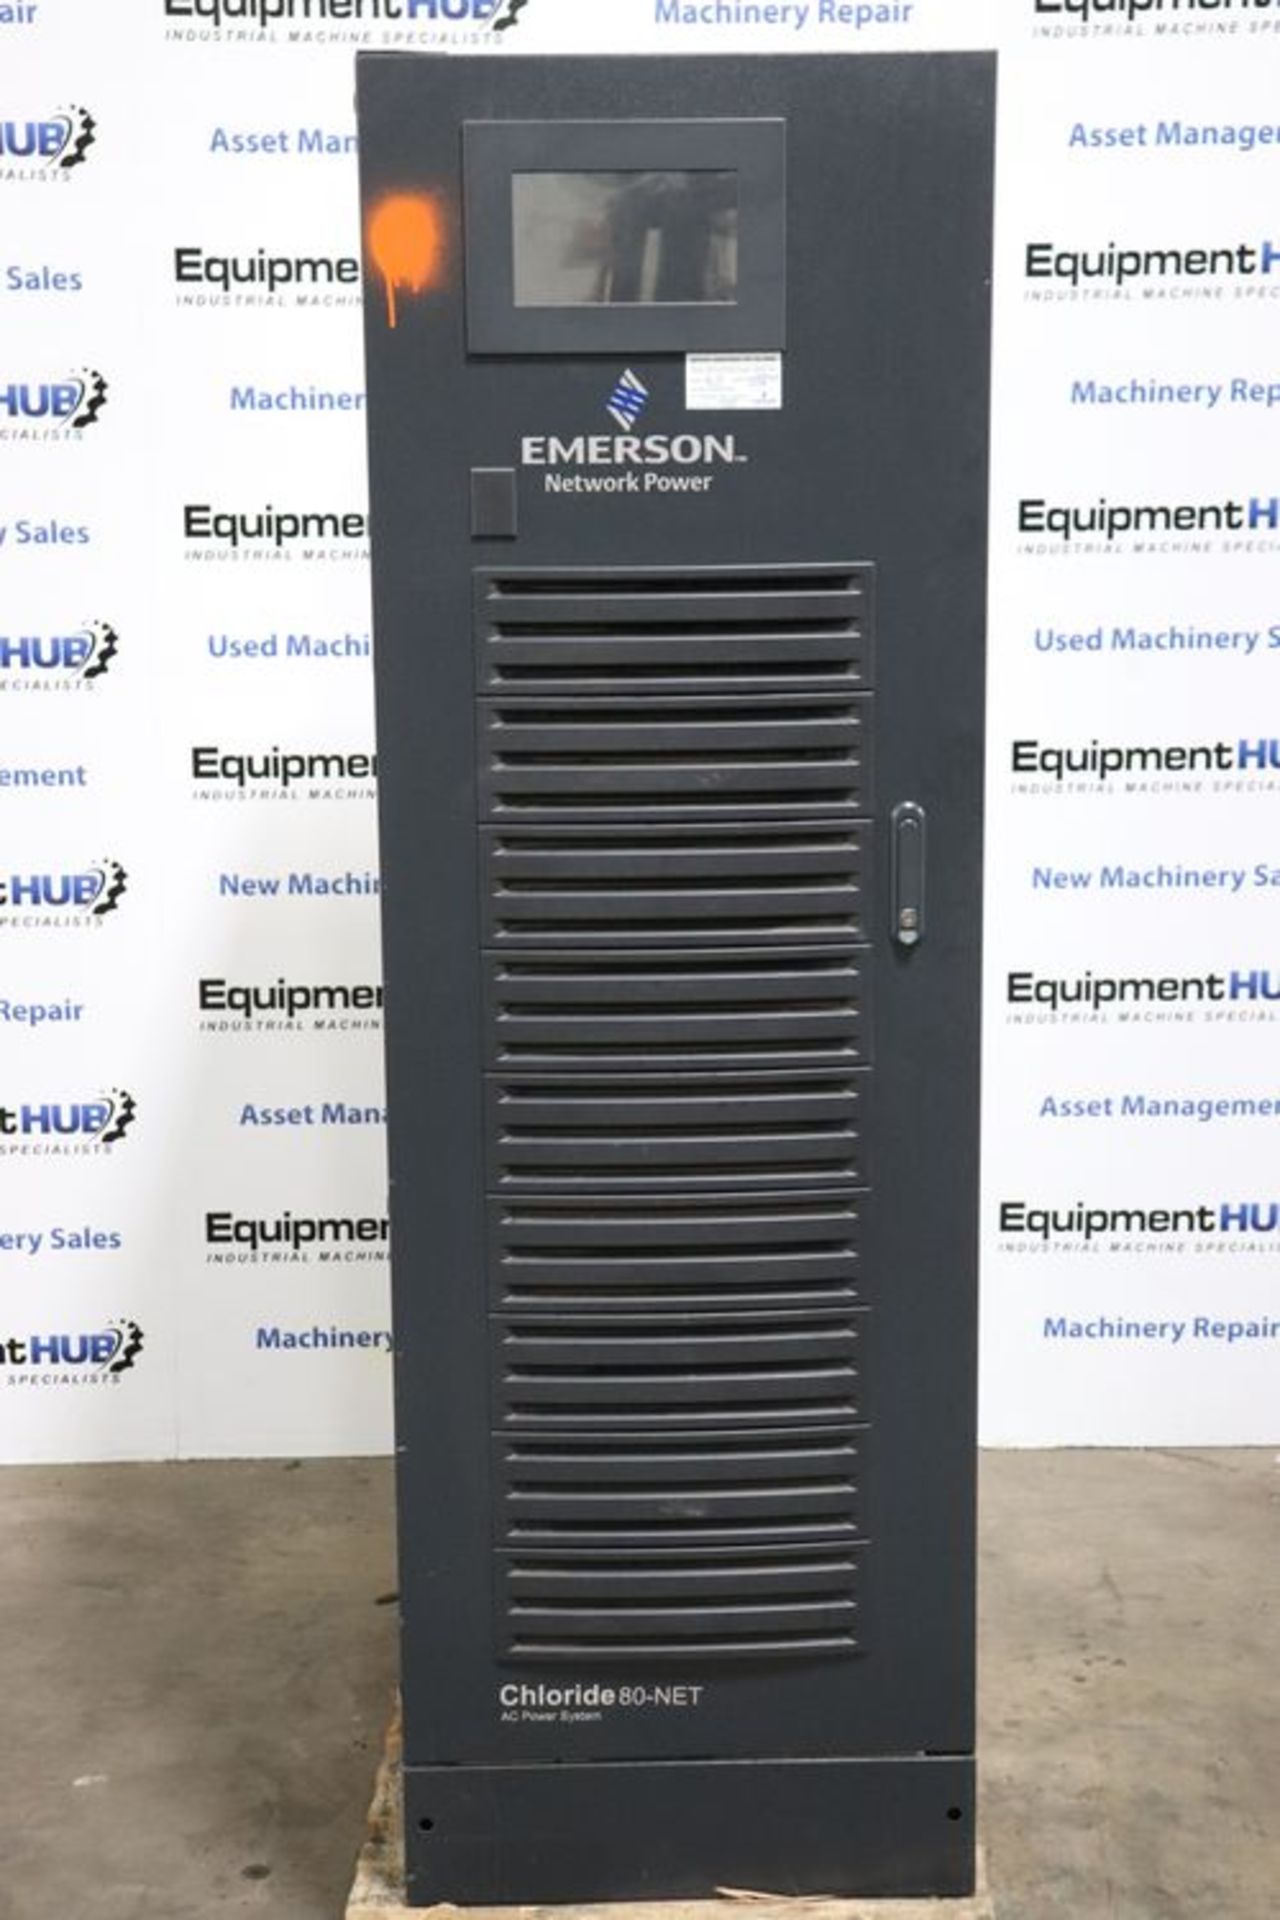 Emerson Chloride 80-NET UPS 60 kVA TS Uninterruptible Power Supply w / Elsy Battery Pack - Image 2 of 12